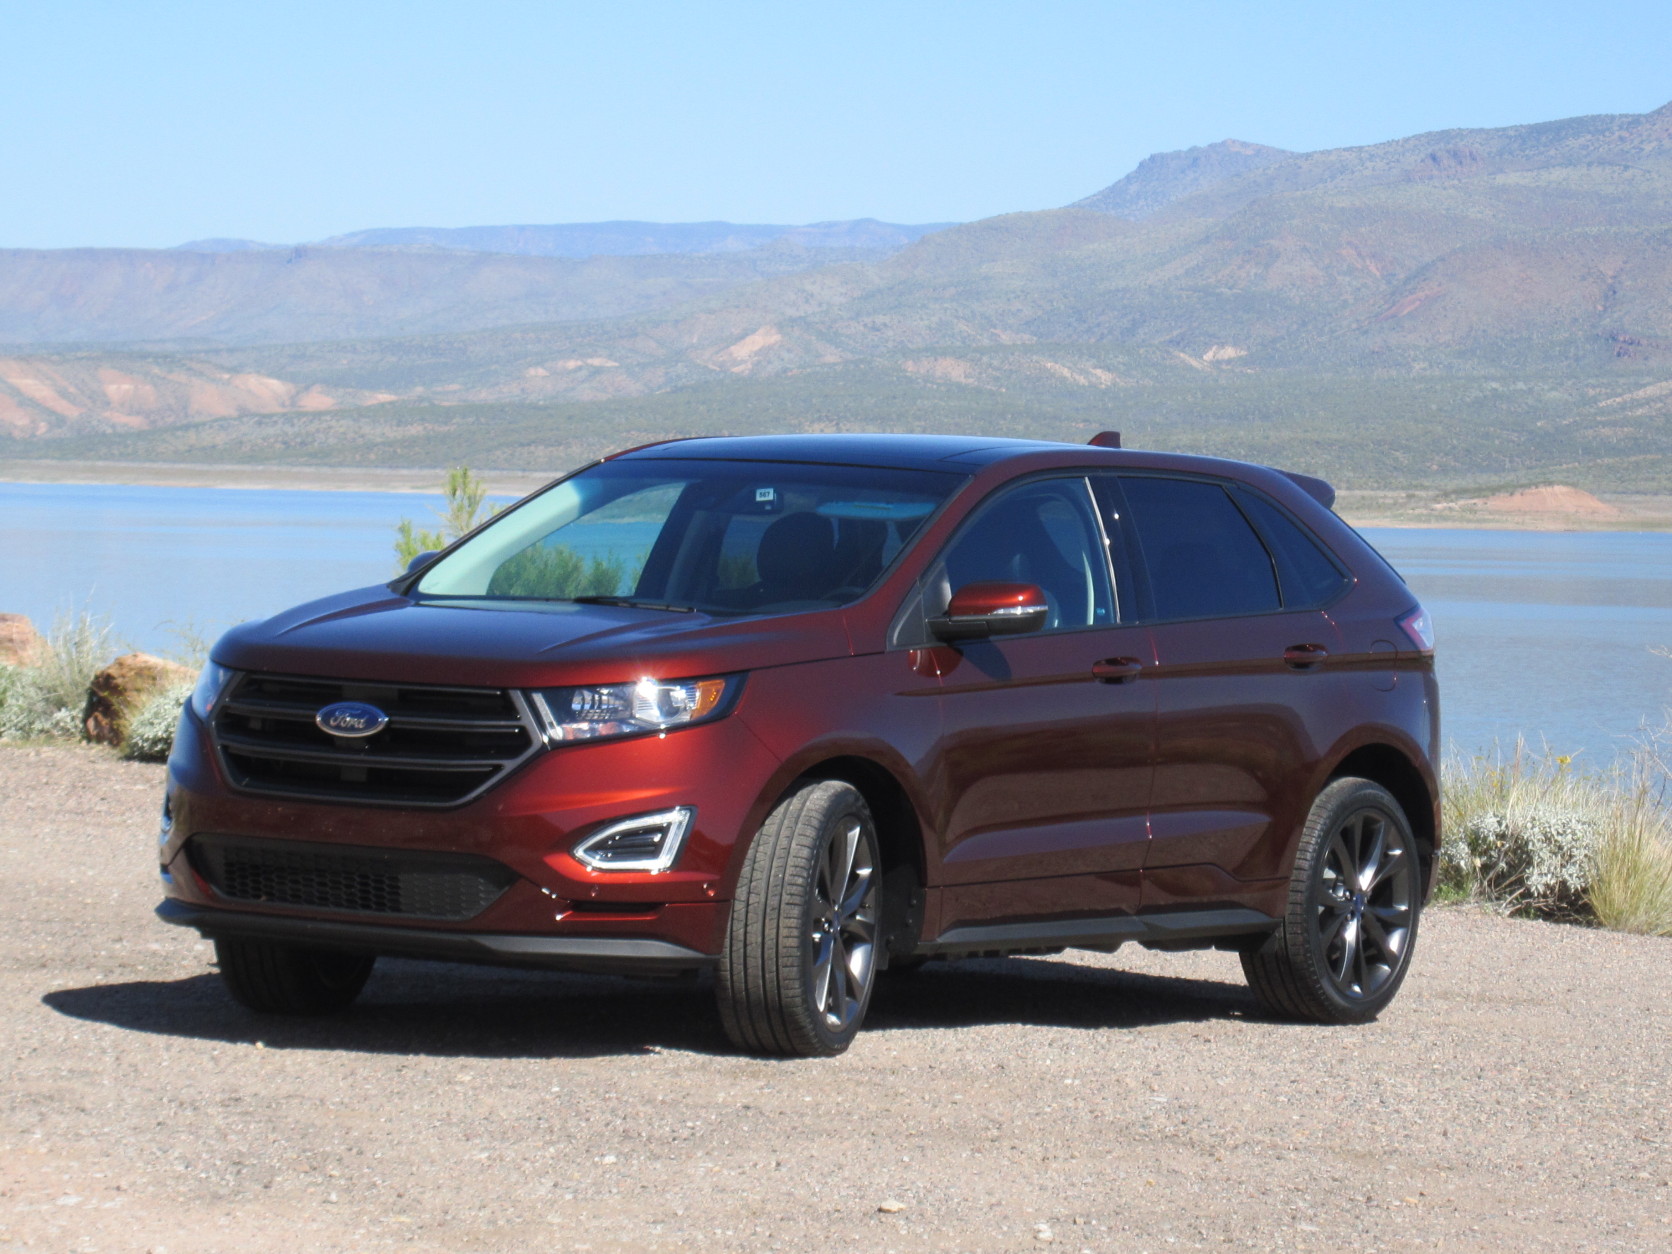 The redesigned Ford Edge is bigger than the Escape, but a little smaller than the Explorer. (WTOP/Mike Parris)